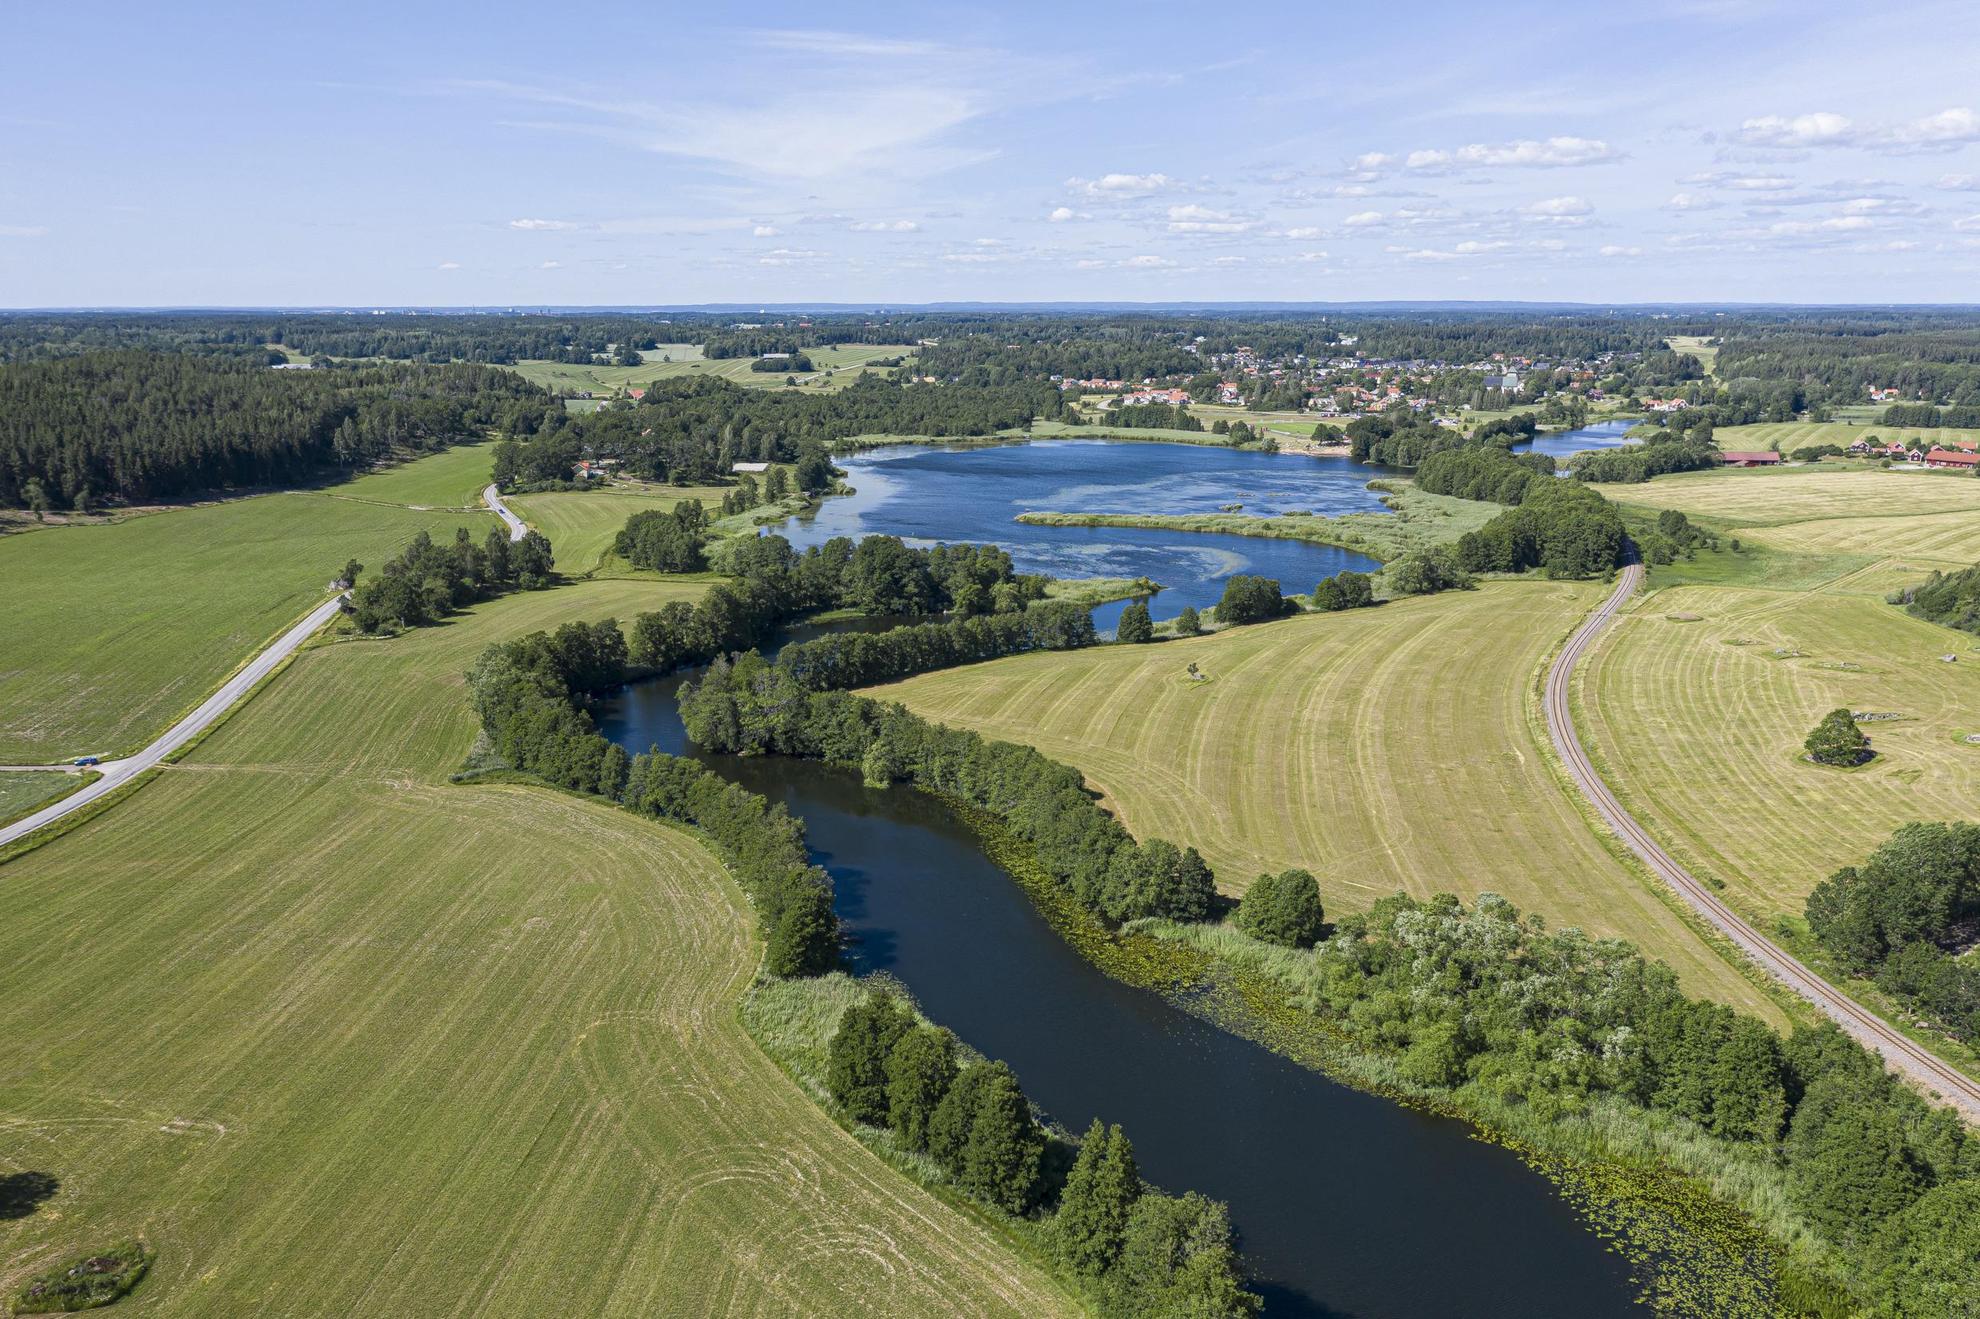 An aerial view of a river that winds between green fields and trees.